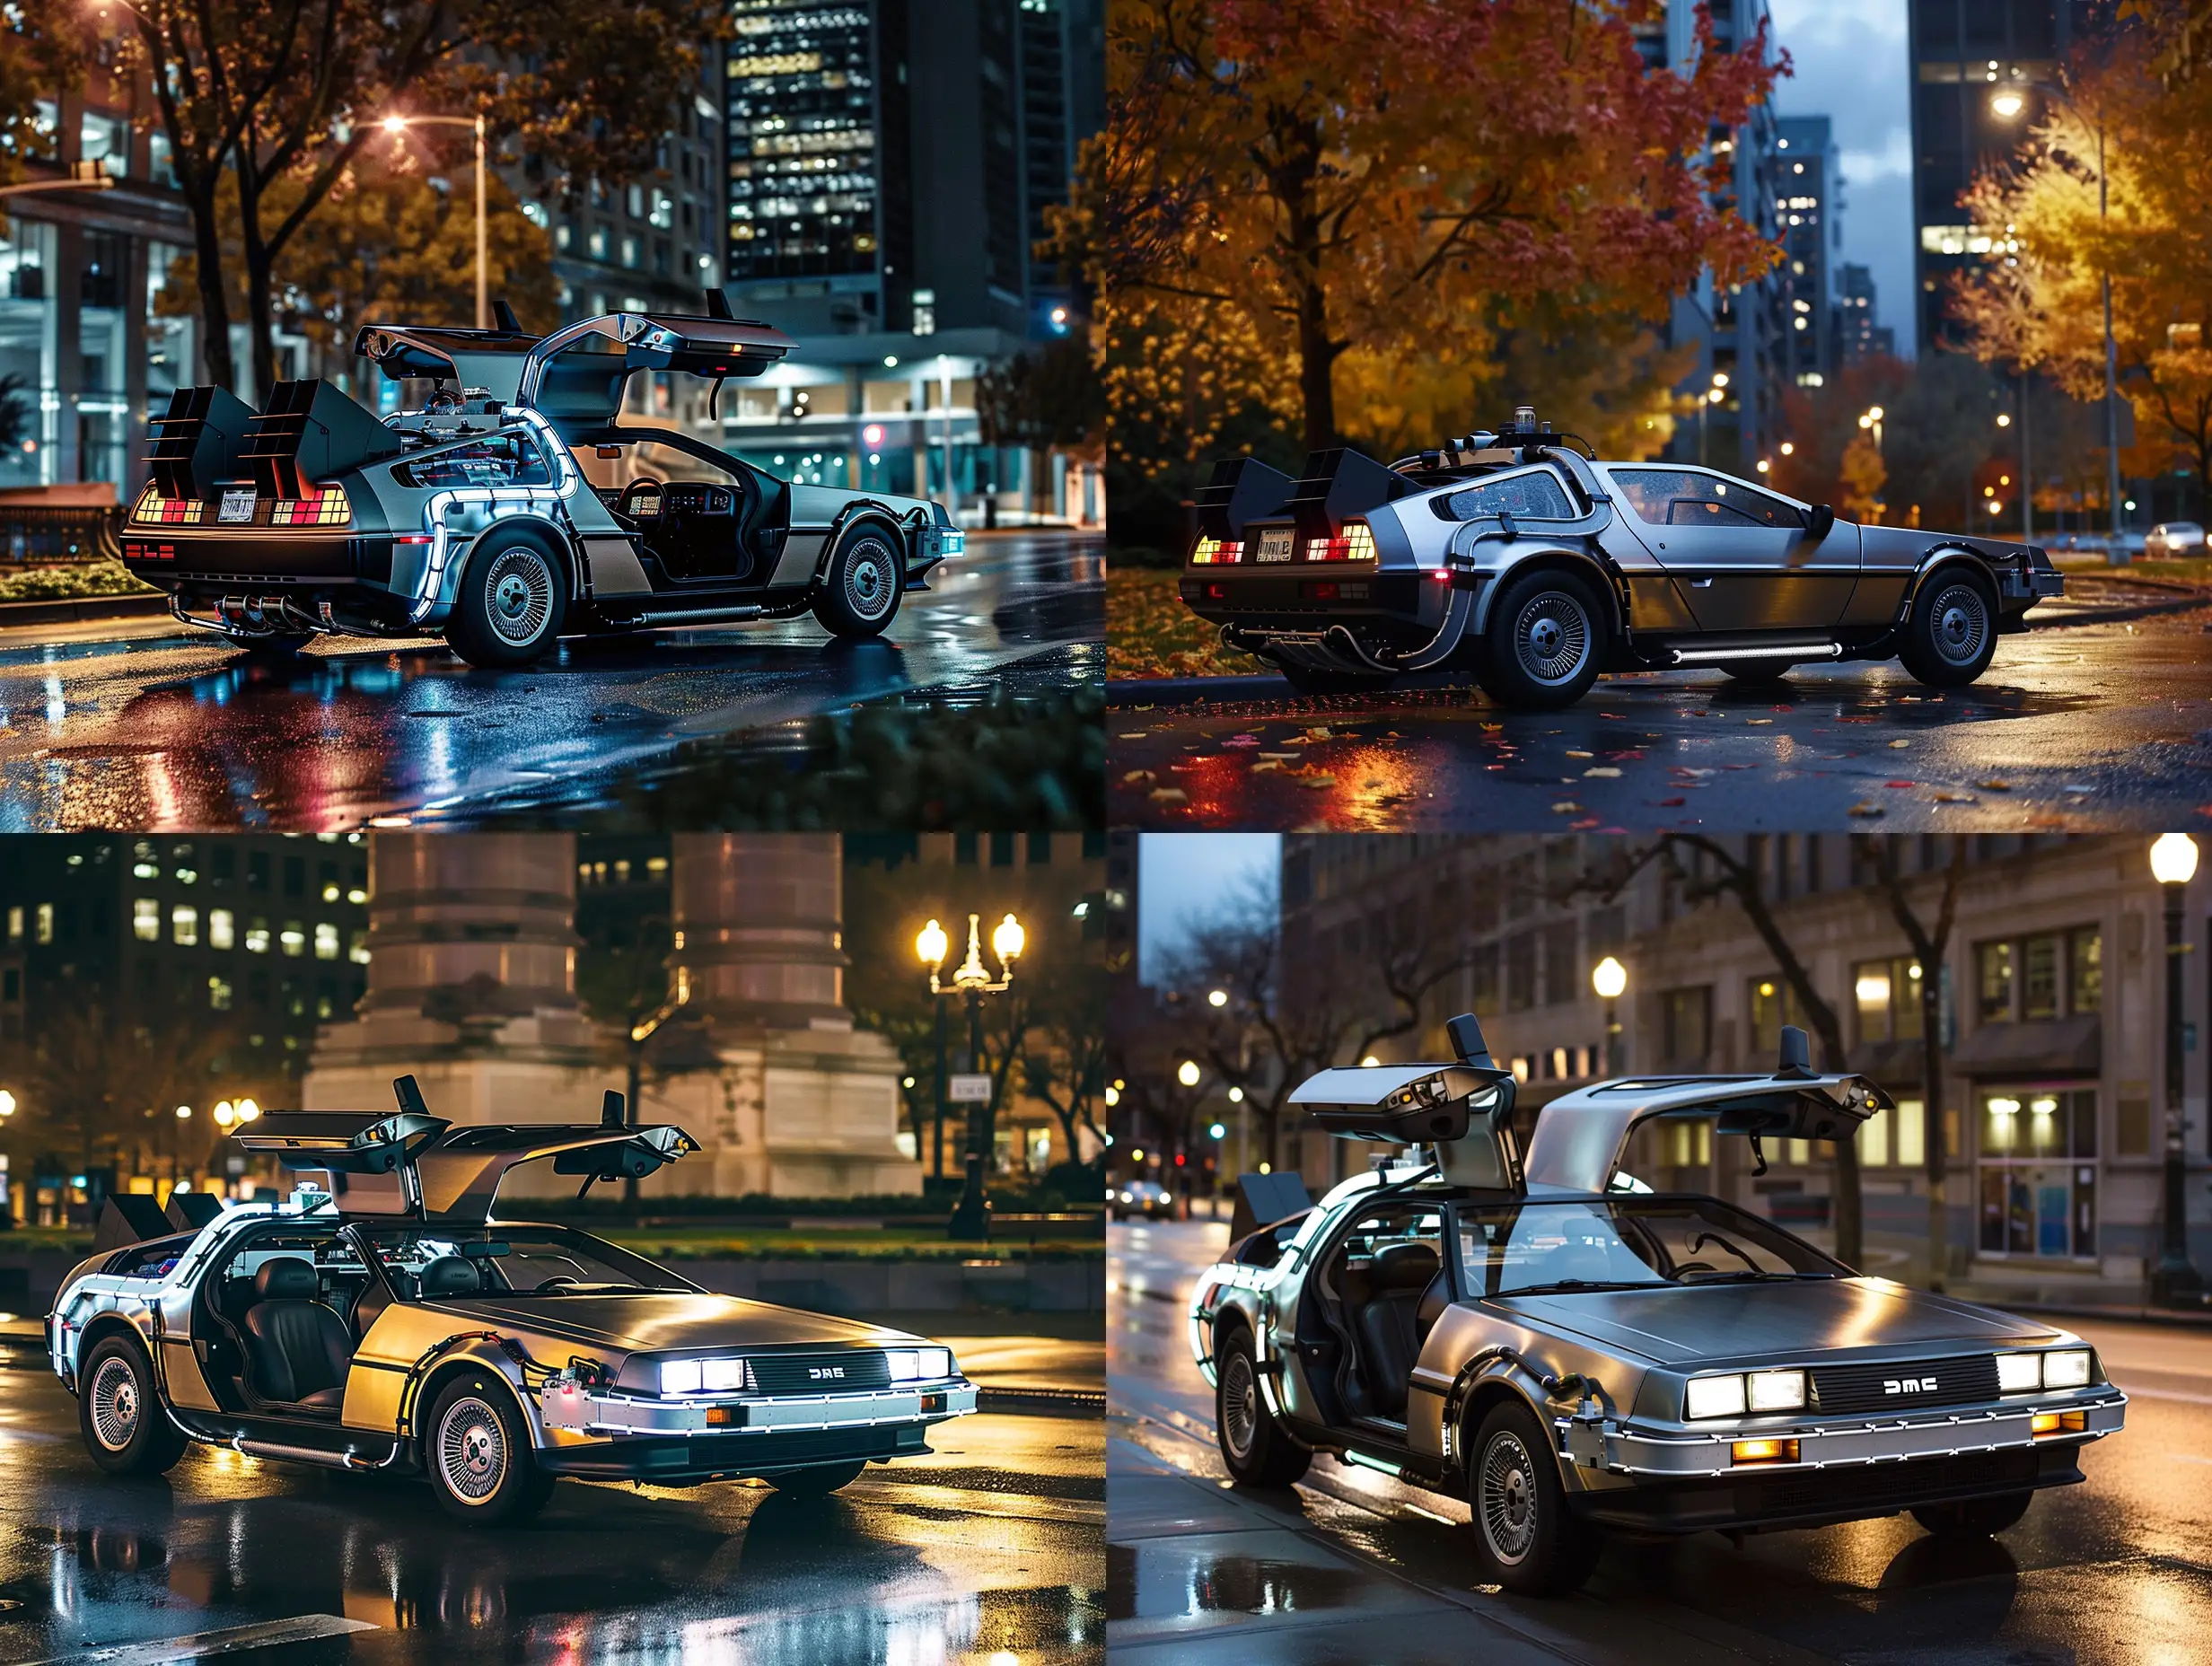 Delorean-Parked-on-Wet-City-Street-at-Night